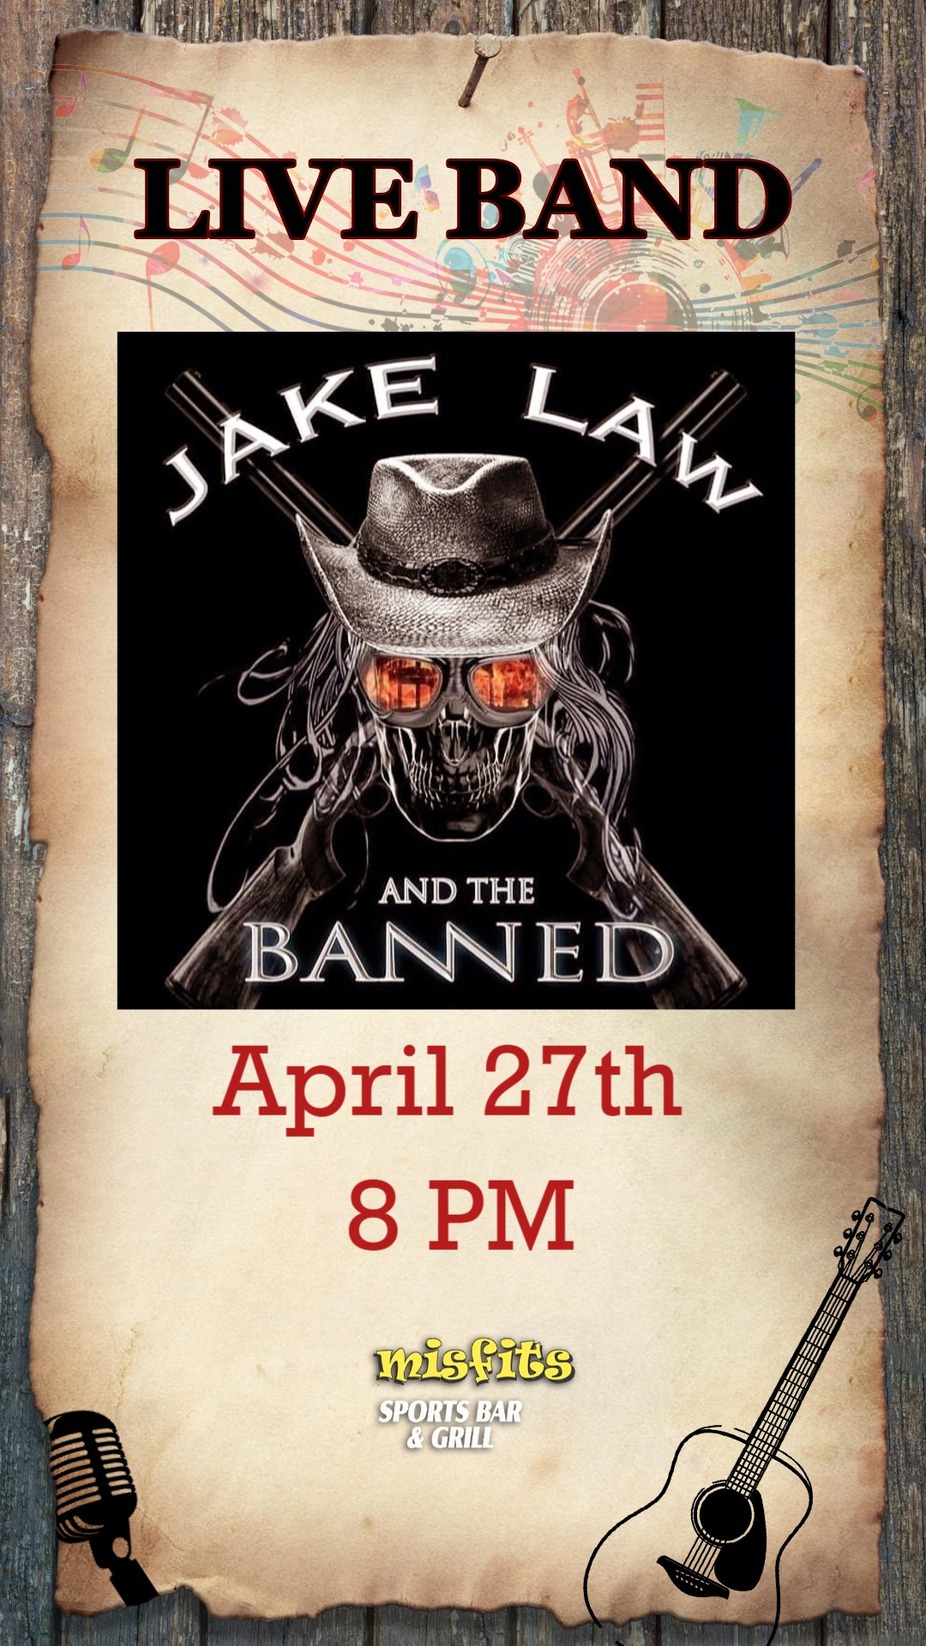 Jake Law and the Banned event photo